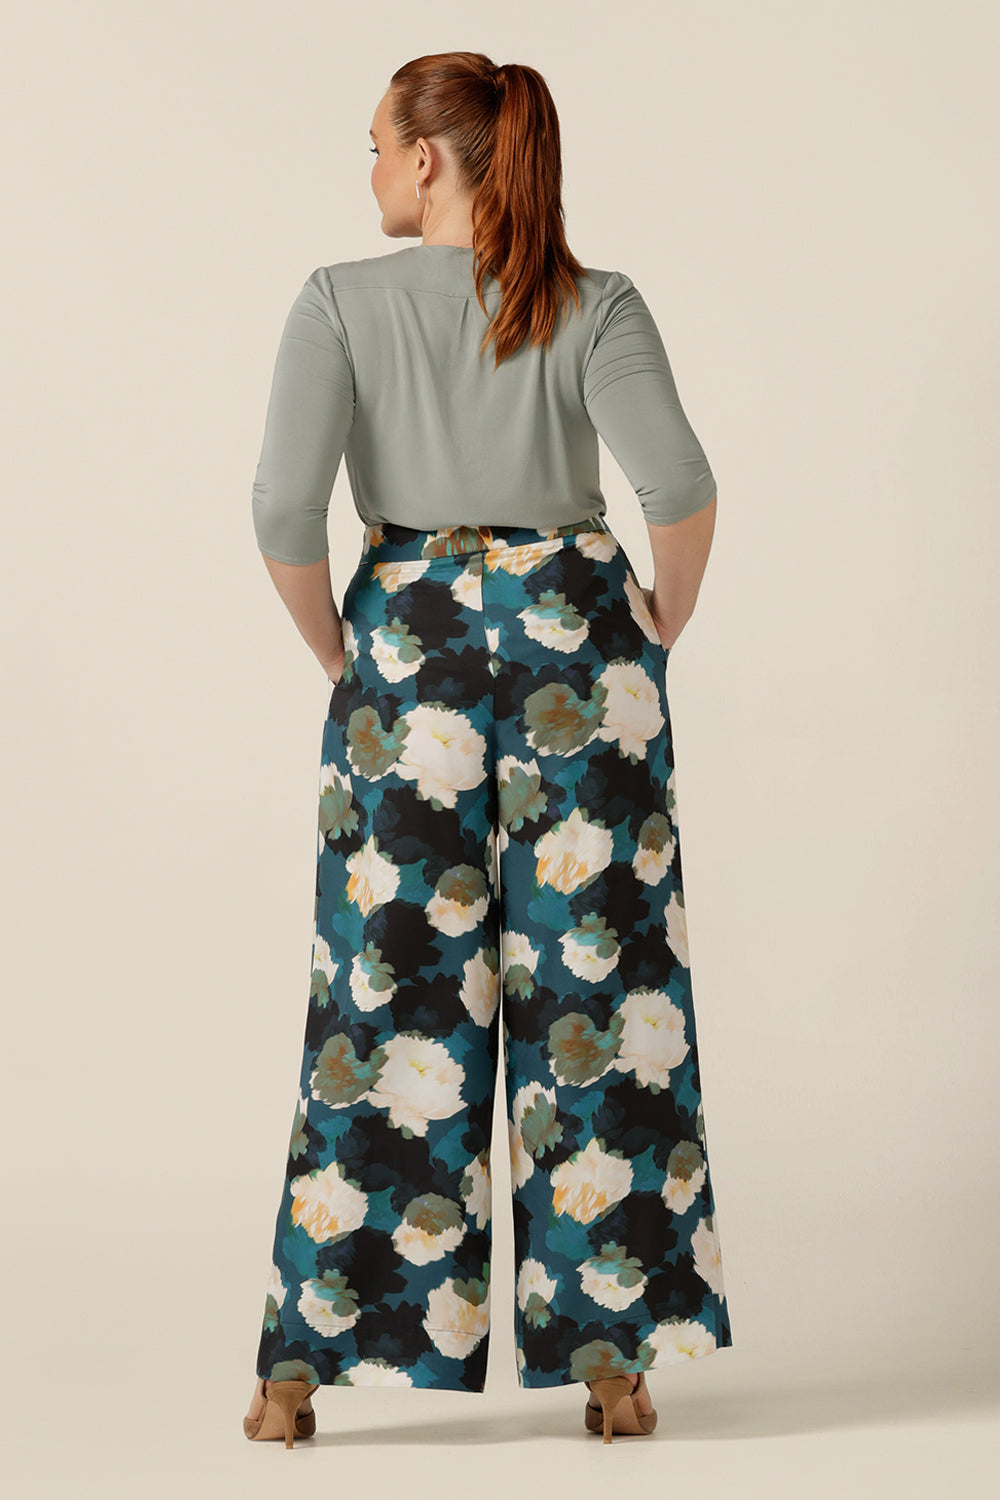 Wide-leg, high-waisted smart printed pants are worn by a size 12, curvy woman. Part of Australian and New Zealand women's clothing label, L&F's focus on sustainable fashion, these work wear trousers are eco-conscious in Tencel fabric. Worn with a casual bamboo jersey top, the Australian-made pants look smart-casual for workwear and beyond!